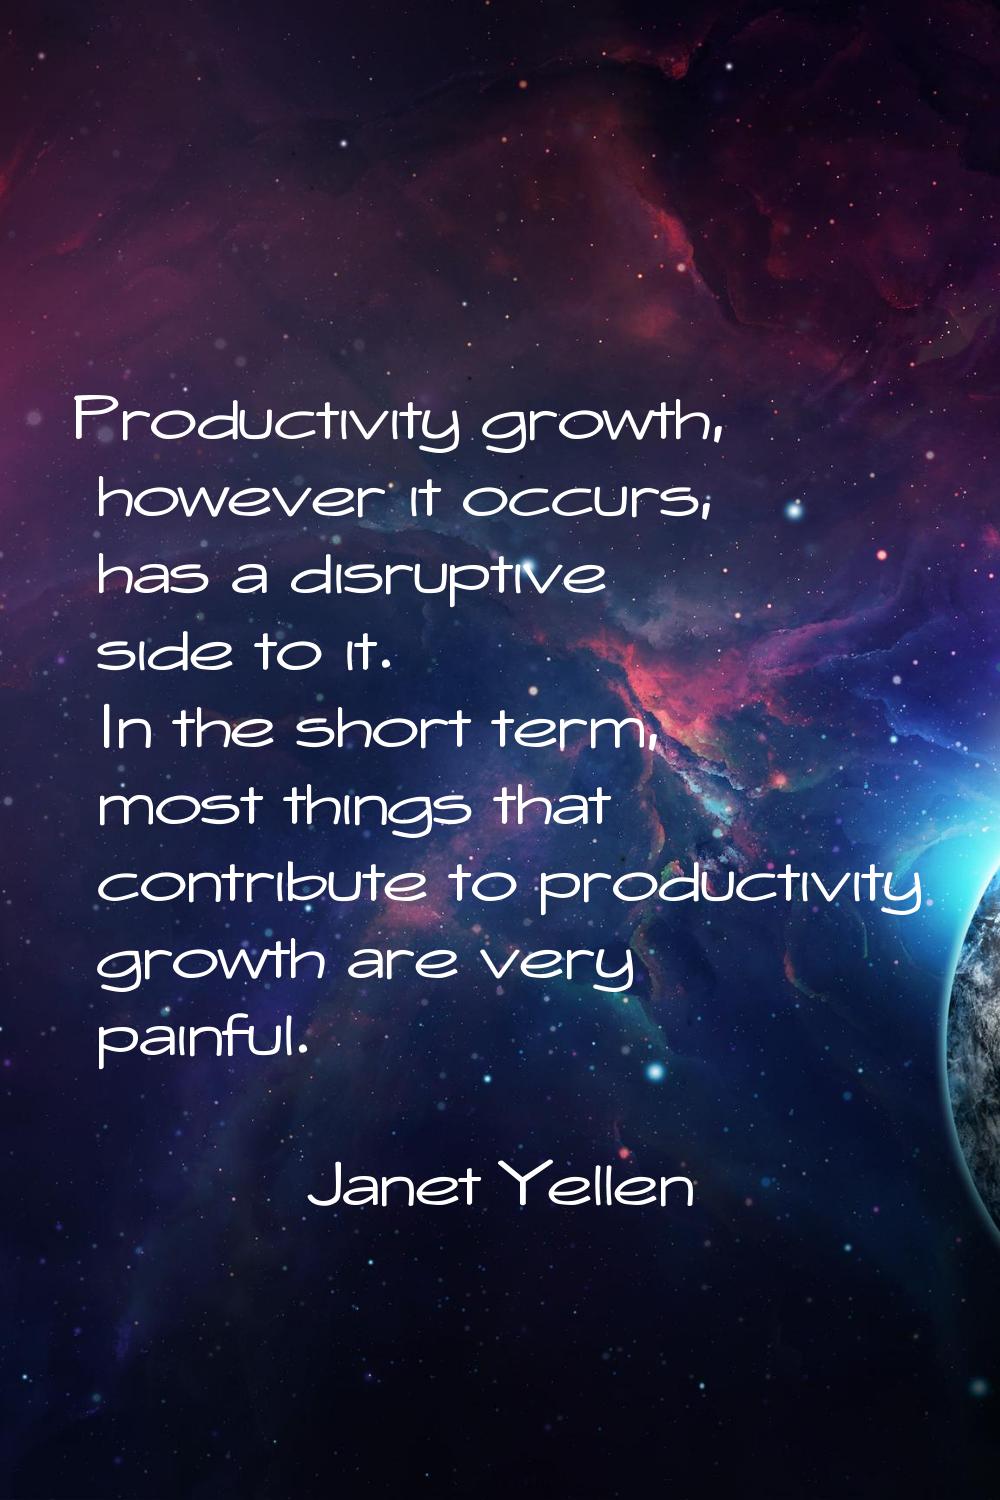 Productivity growth, however it occurs, has a disruptive side to it. In the short term, most things